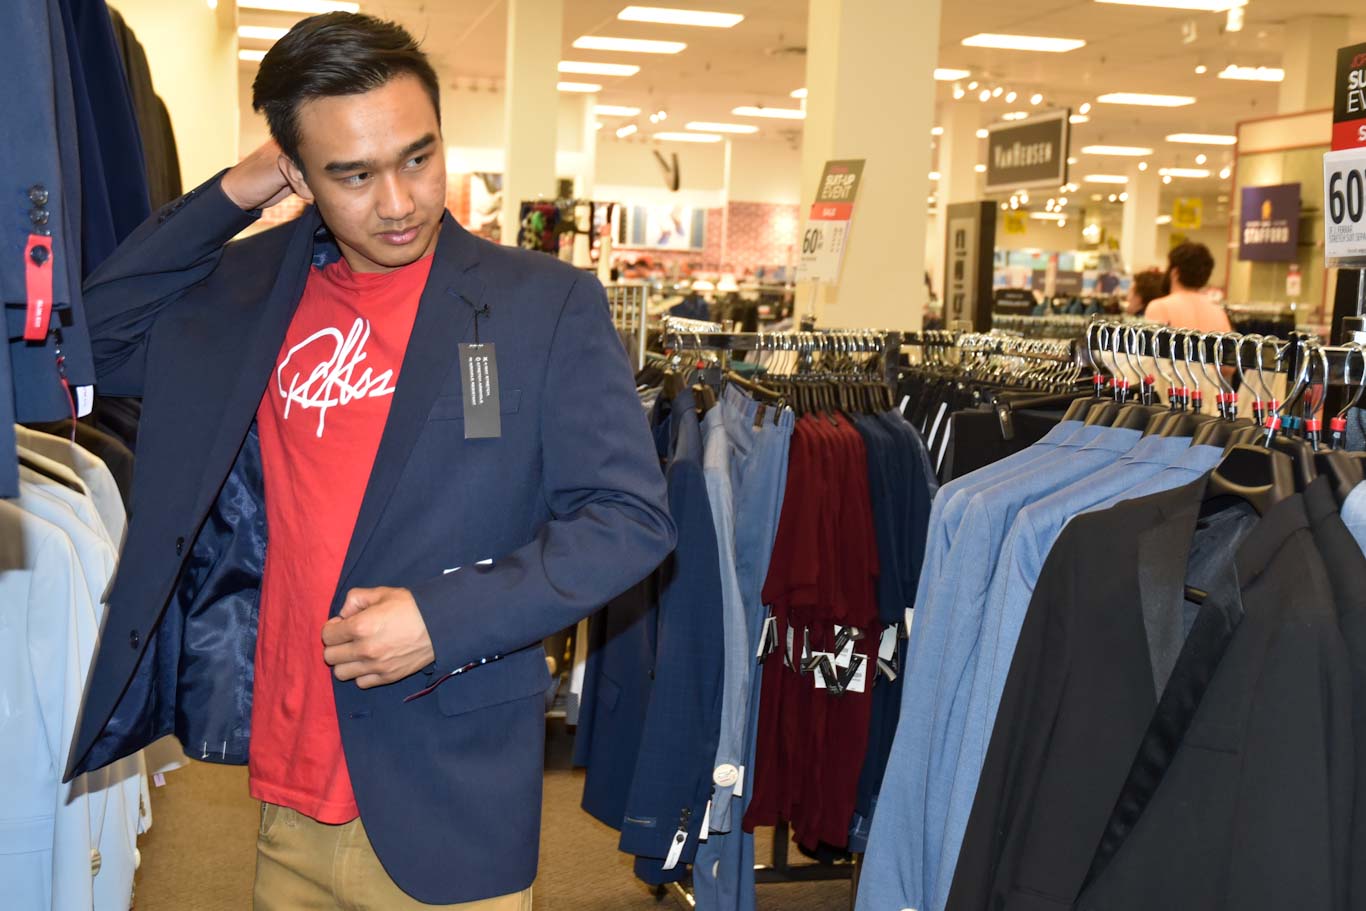 San Joaquin Delta College students enjoyed deep discounts on career apparel at the JCPenney Suit-Up event on April 8.